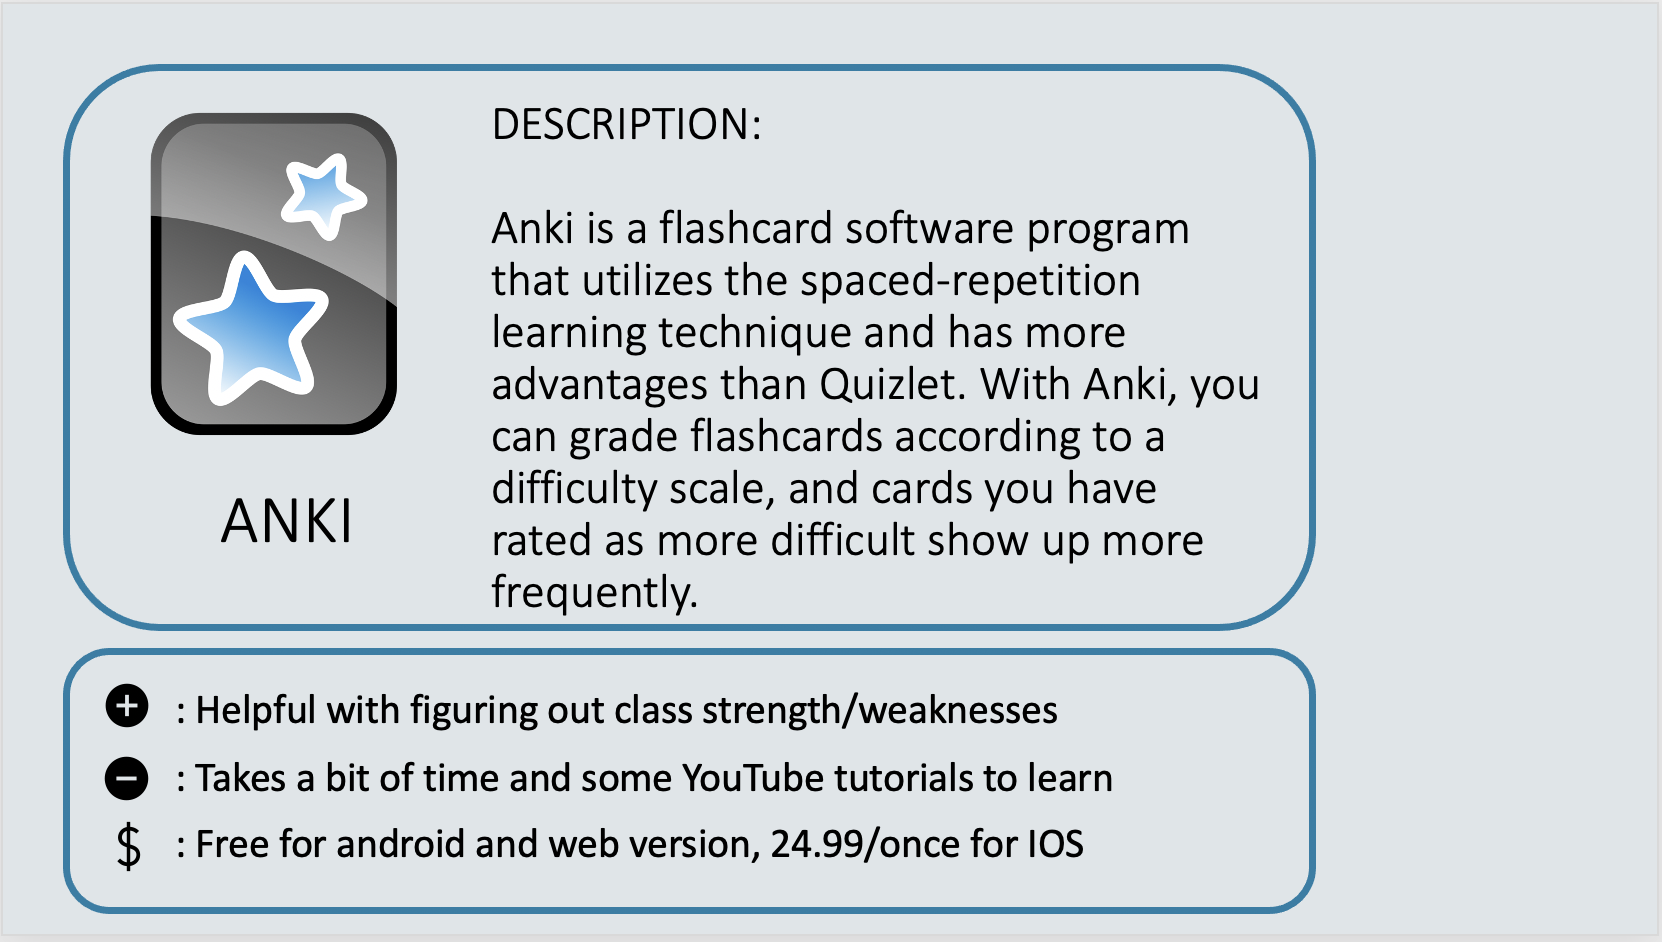 ANKI - Anki is a flashcard software program that utilizes the spaced-repetition learning technique and has more advantages than Quizlet. With Anki, you can grade flashcards according to a difficulty scale, and cards you have rated as more difficult show up more frequently. Positive: Helpful with figuring out class strength/weaknesses. Negative: Takes a bit of time and some YouTube tutorials to learn. Cost: Free for android and web version, 24.99/once for IOS